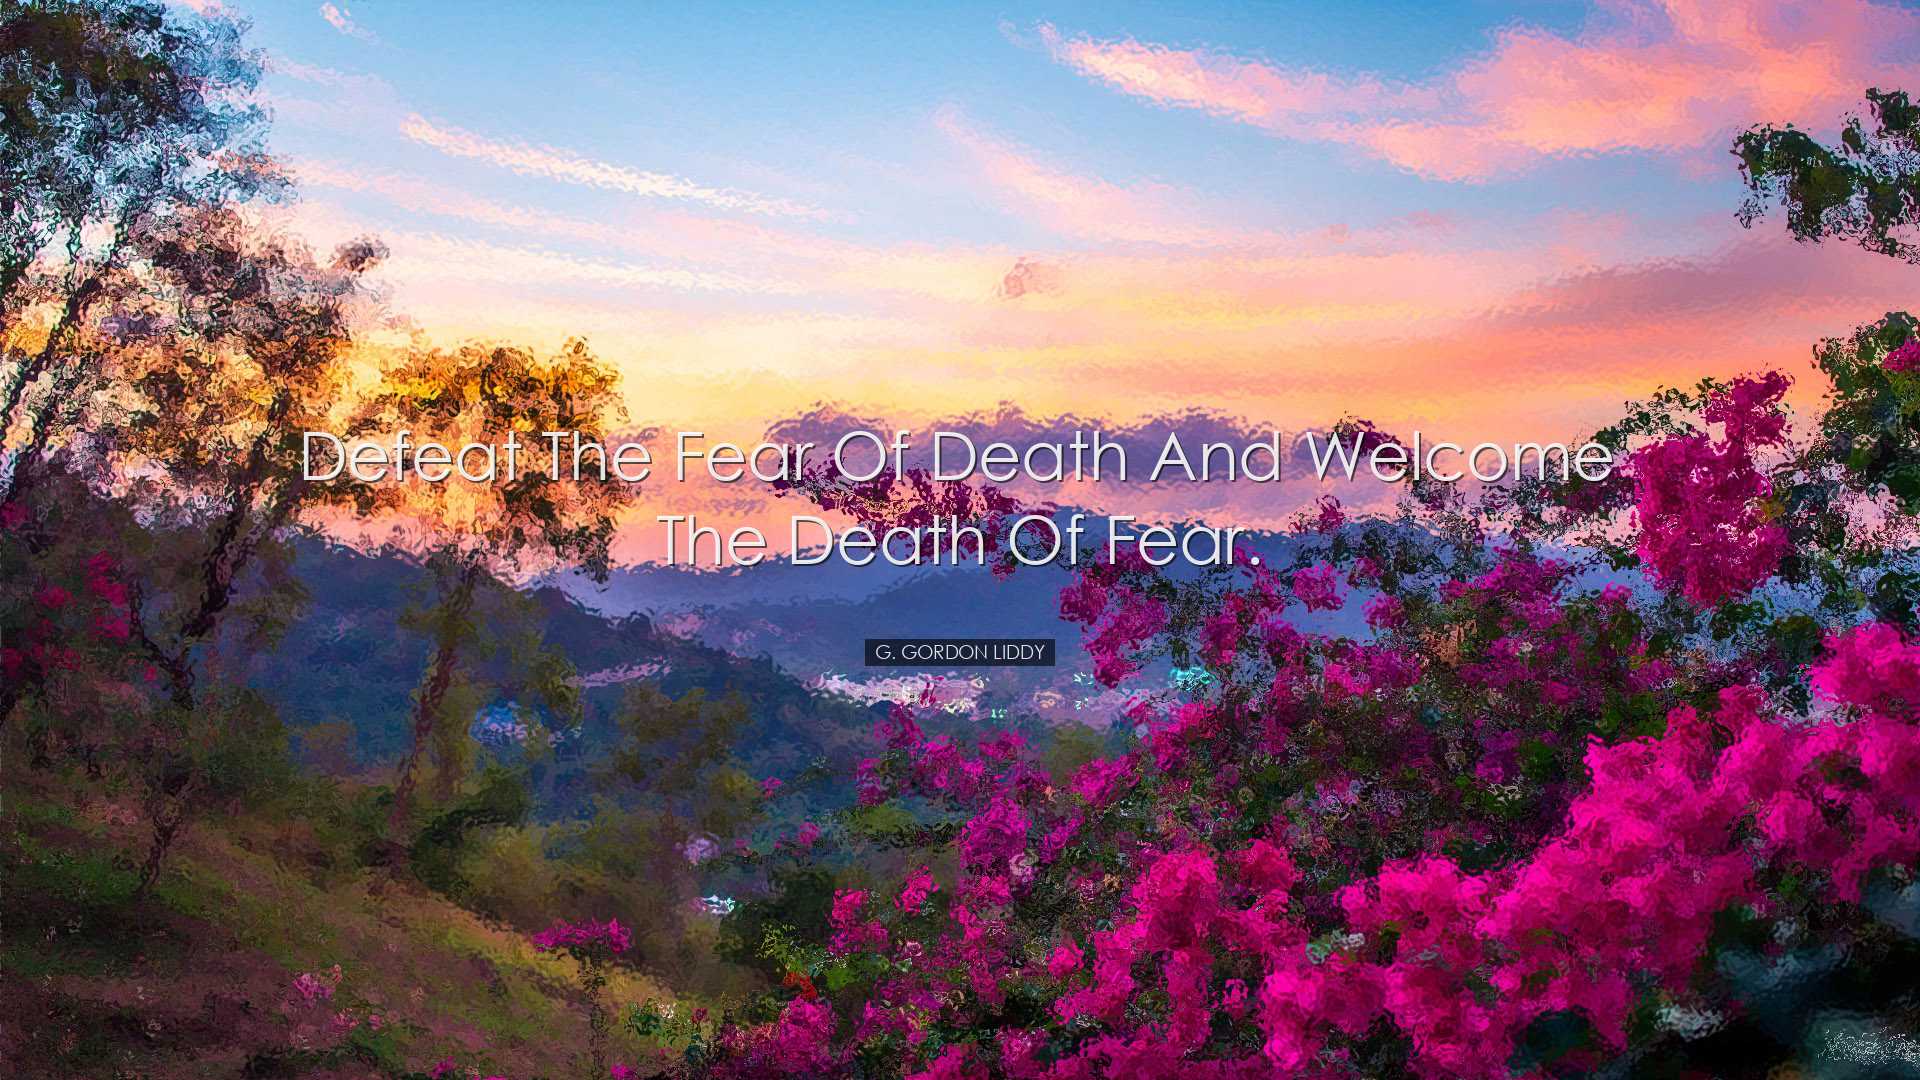 Defeat the fear of death and welcome the death of fear. - G. Gordo